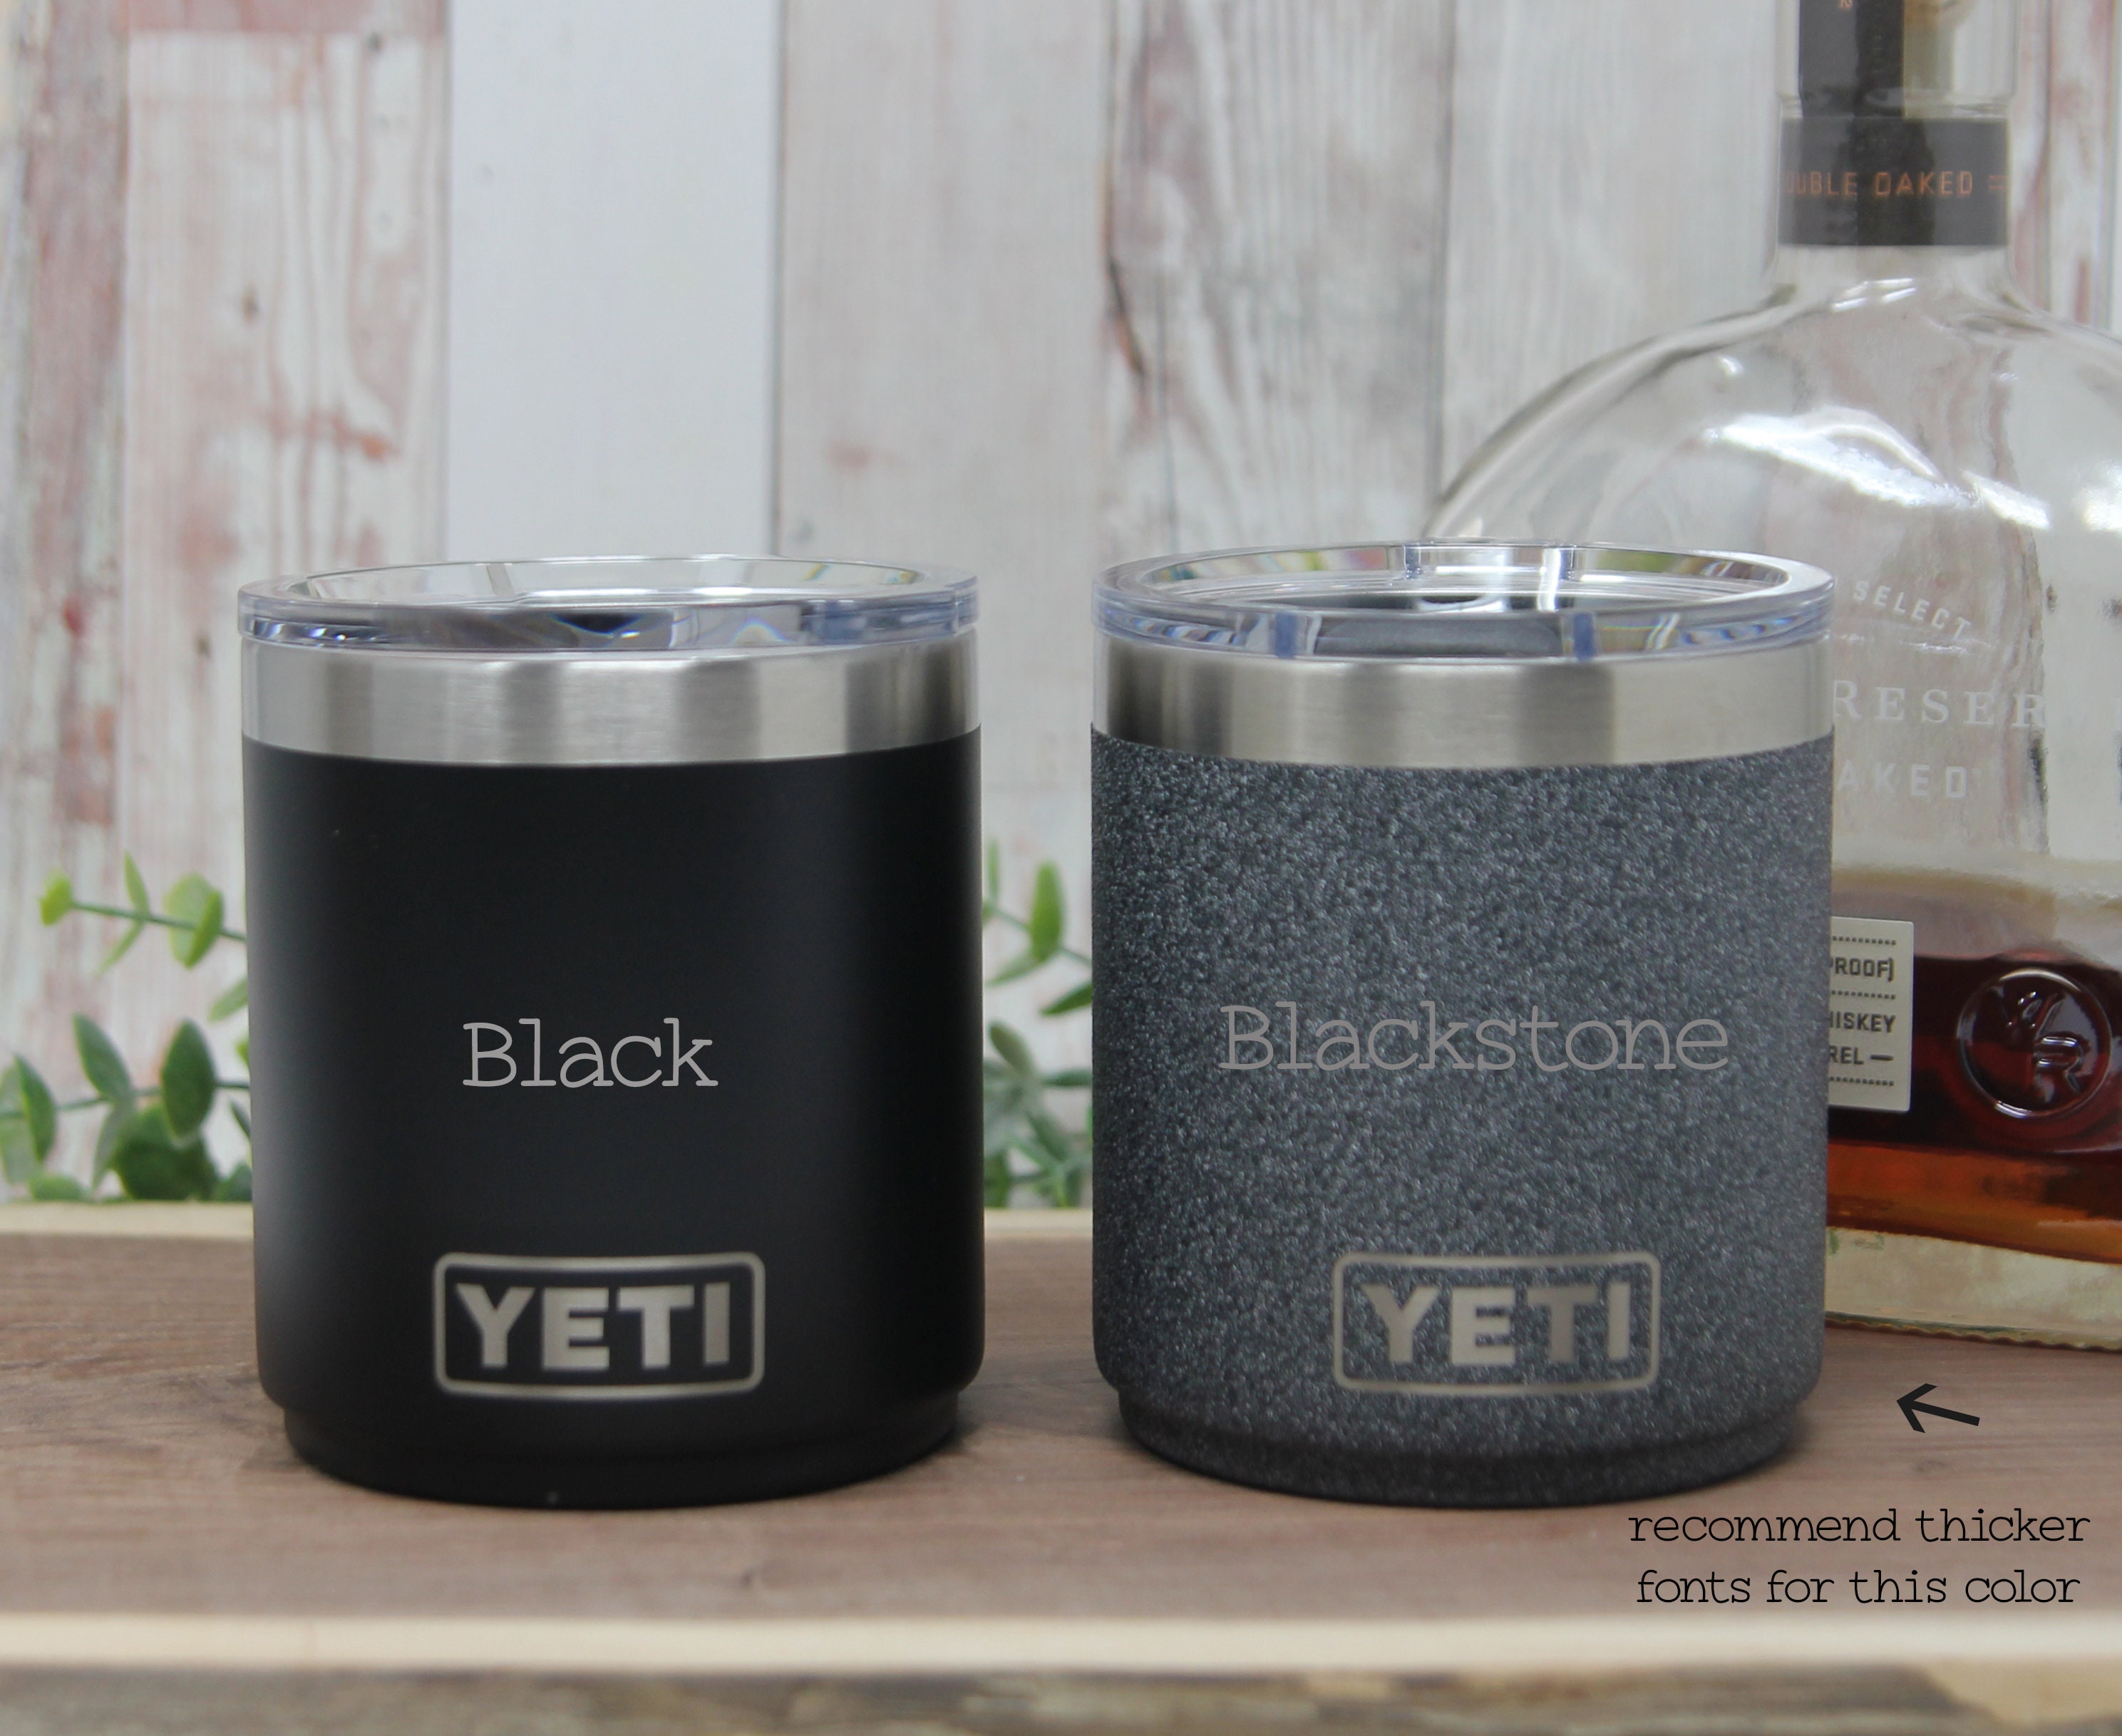 Yeti Lowball Personalize 10 Oz With Custom Laser Engraving 10oz Lowball Whiskey  Tumbler Stackable Rocks Cup Gift 